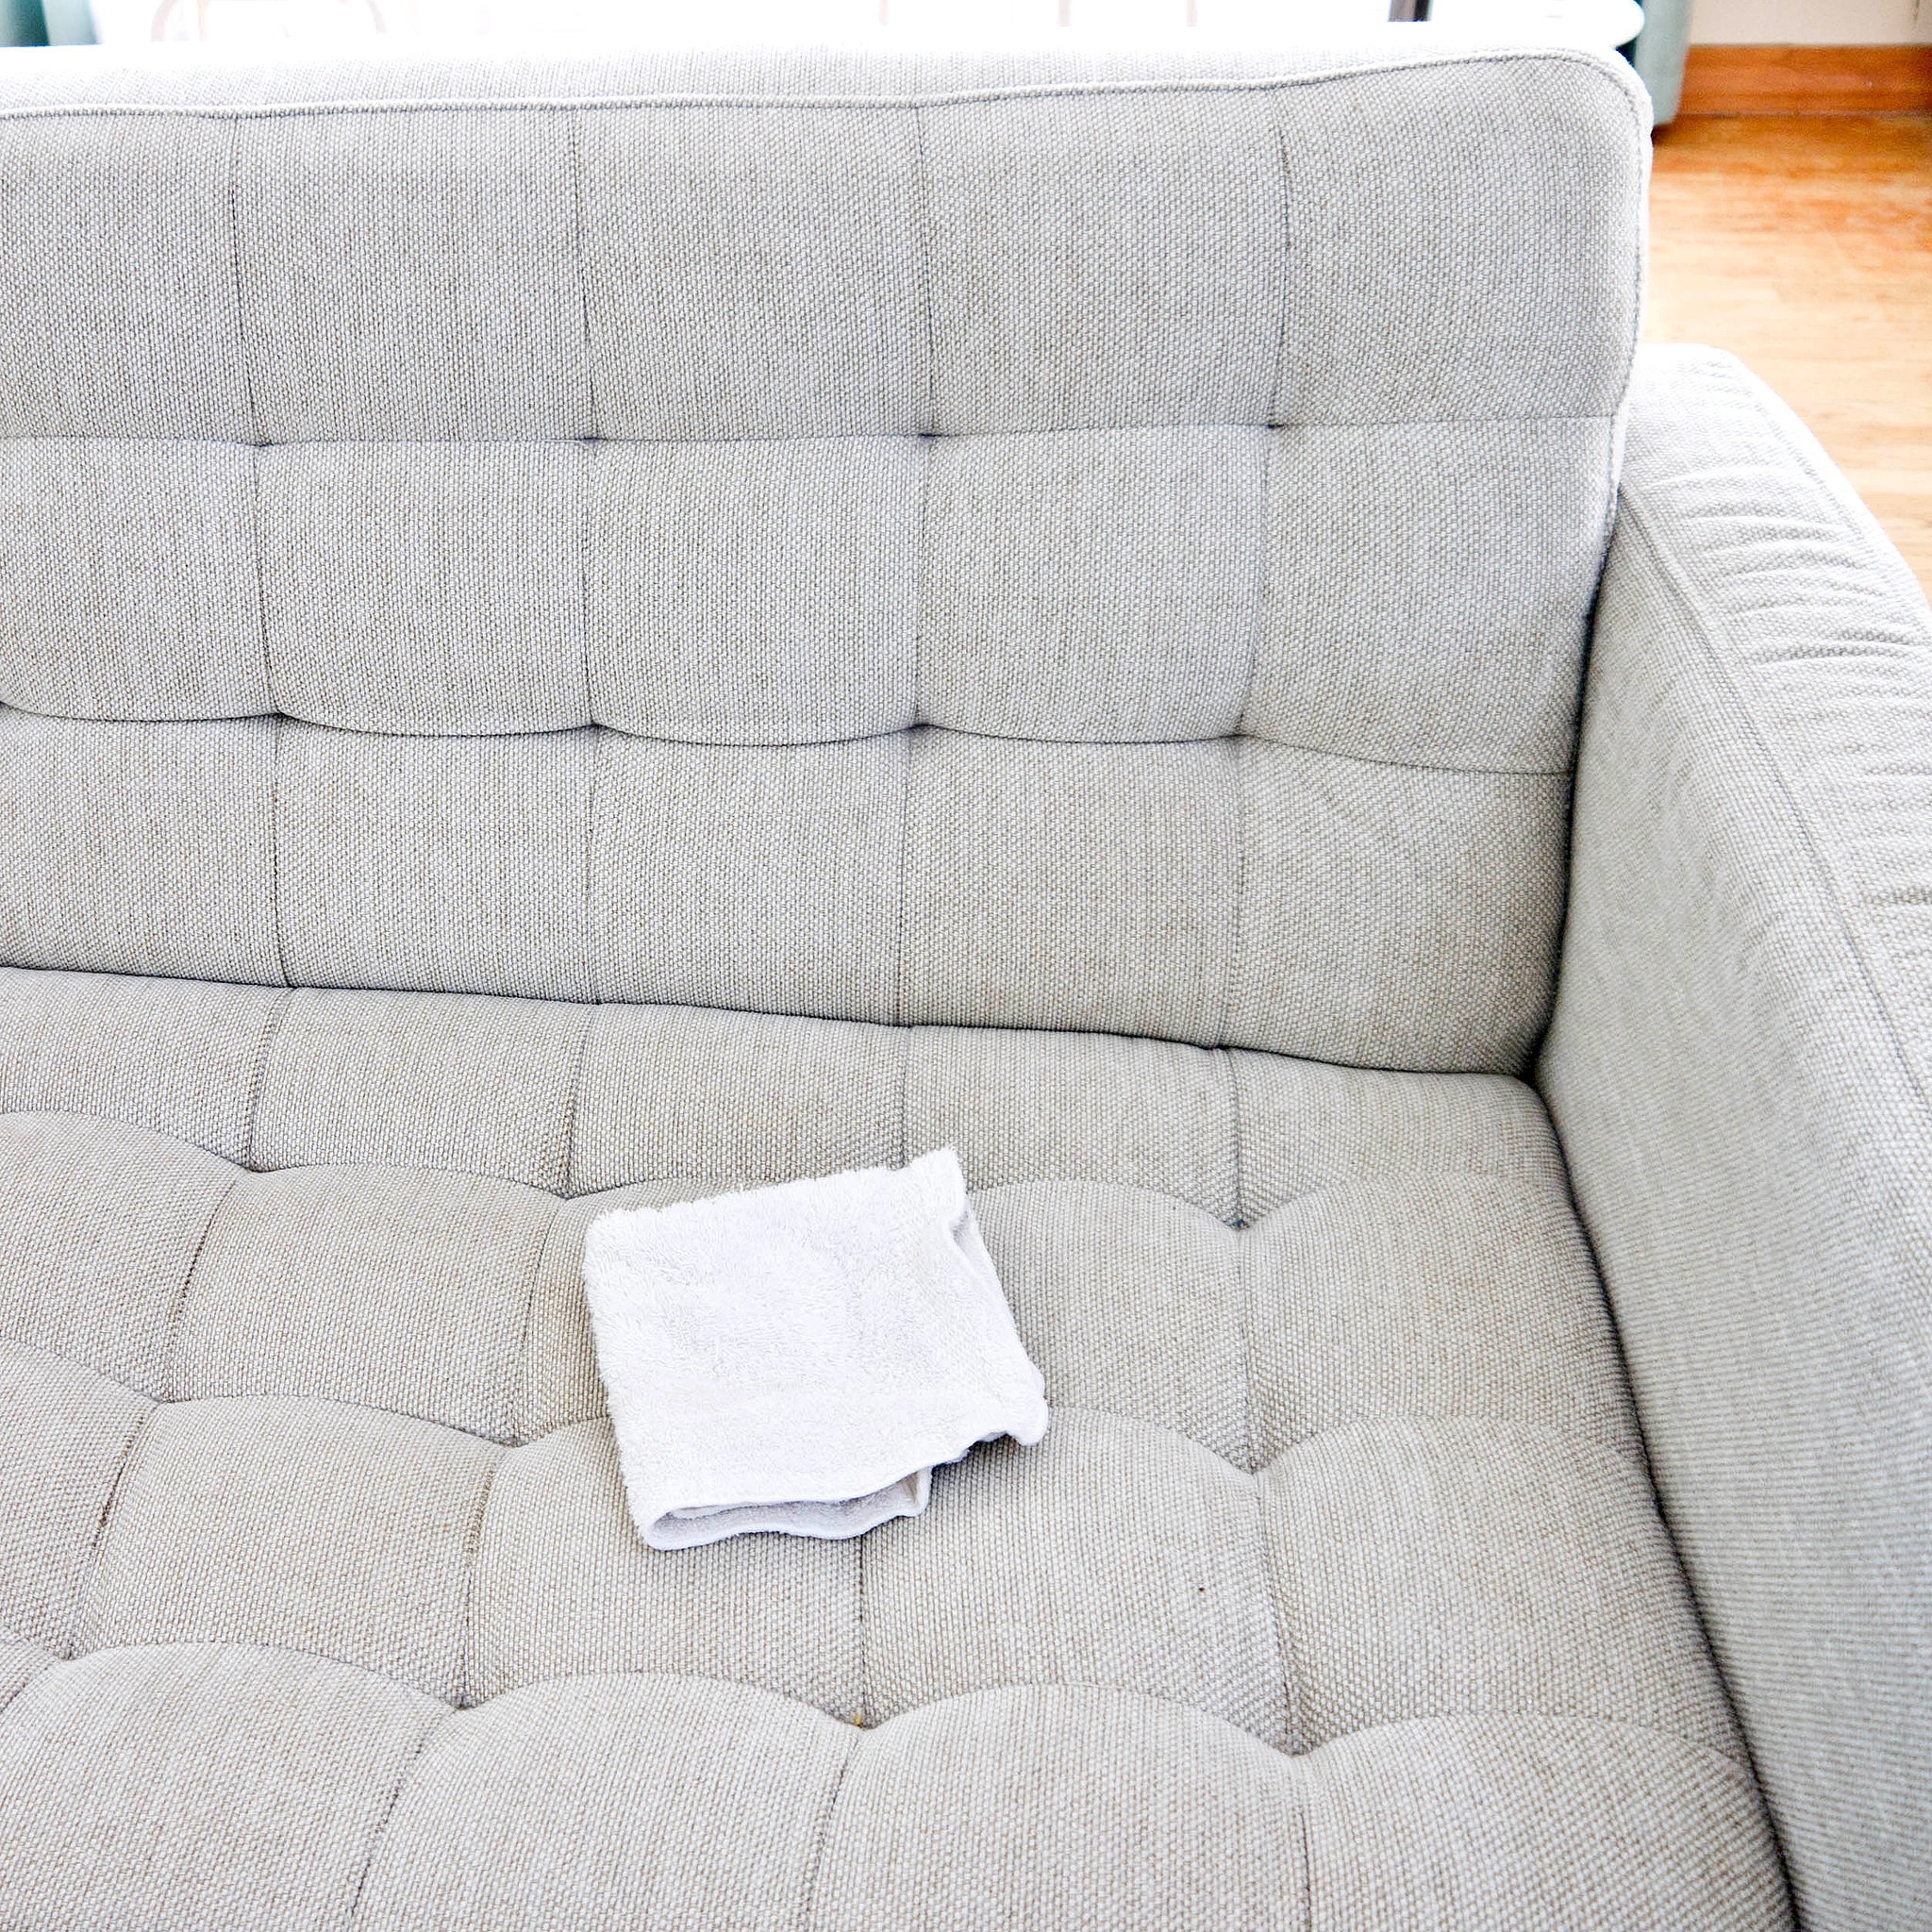 How To Clean A Natural Fabric Couch Popsugar Smart Living